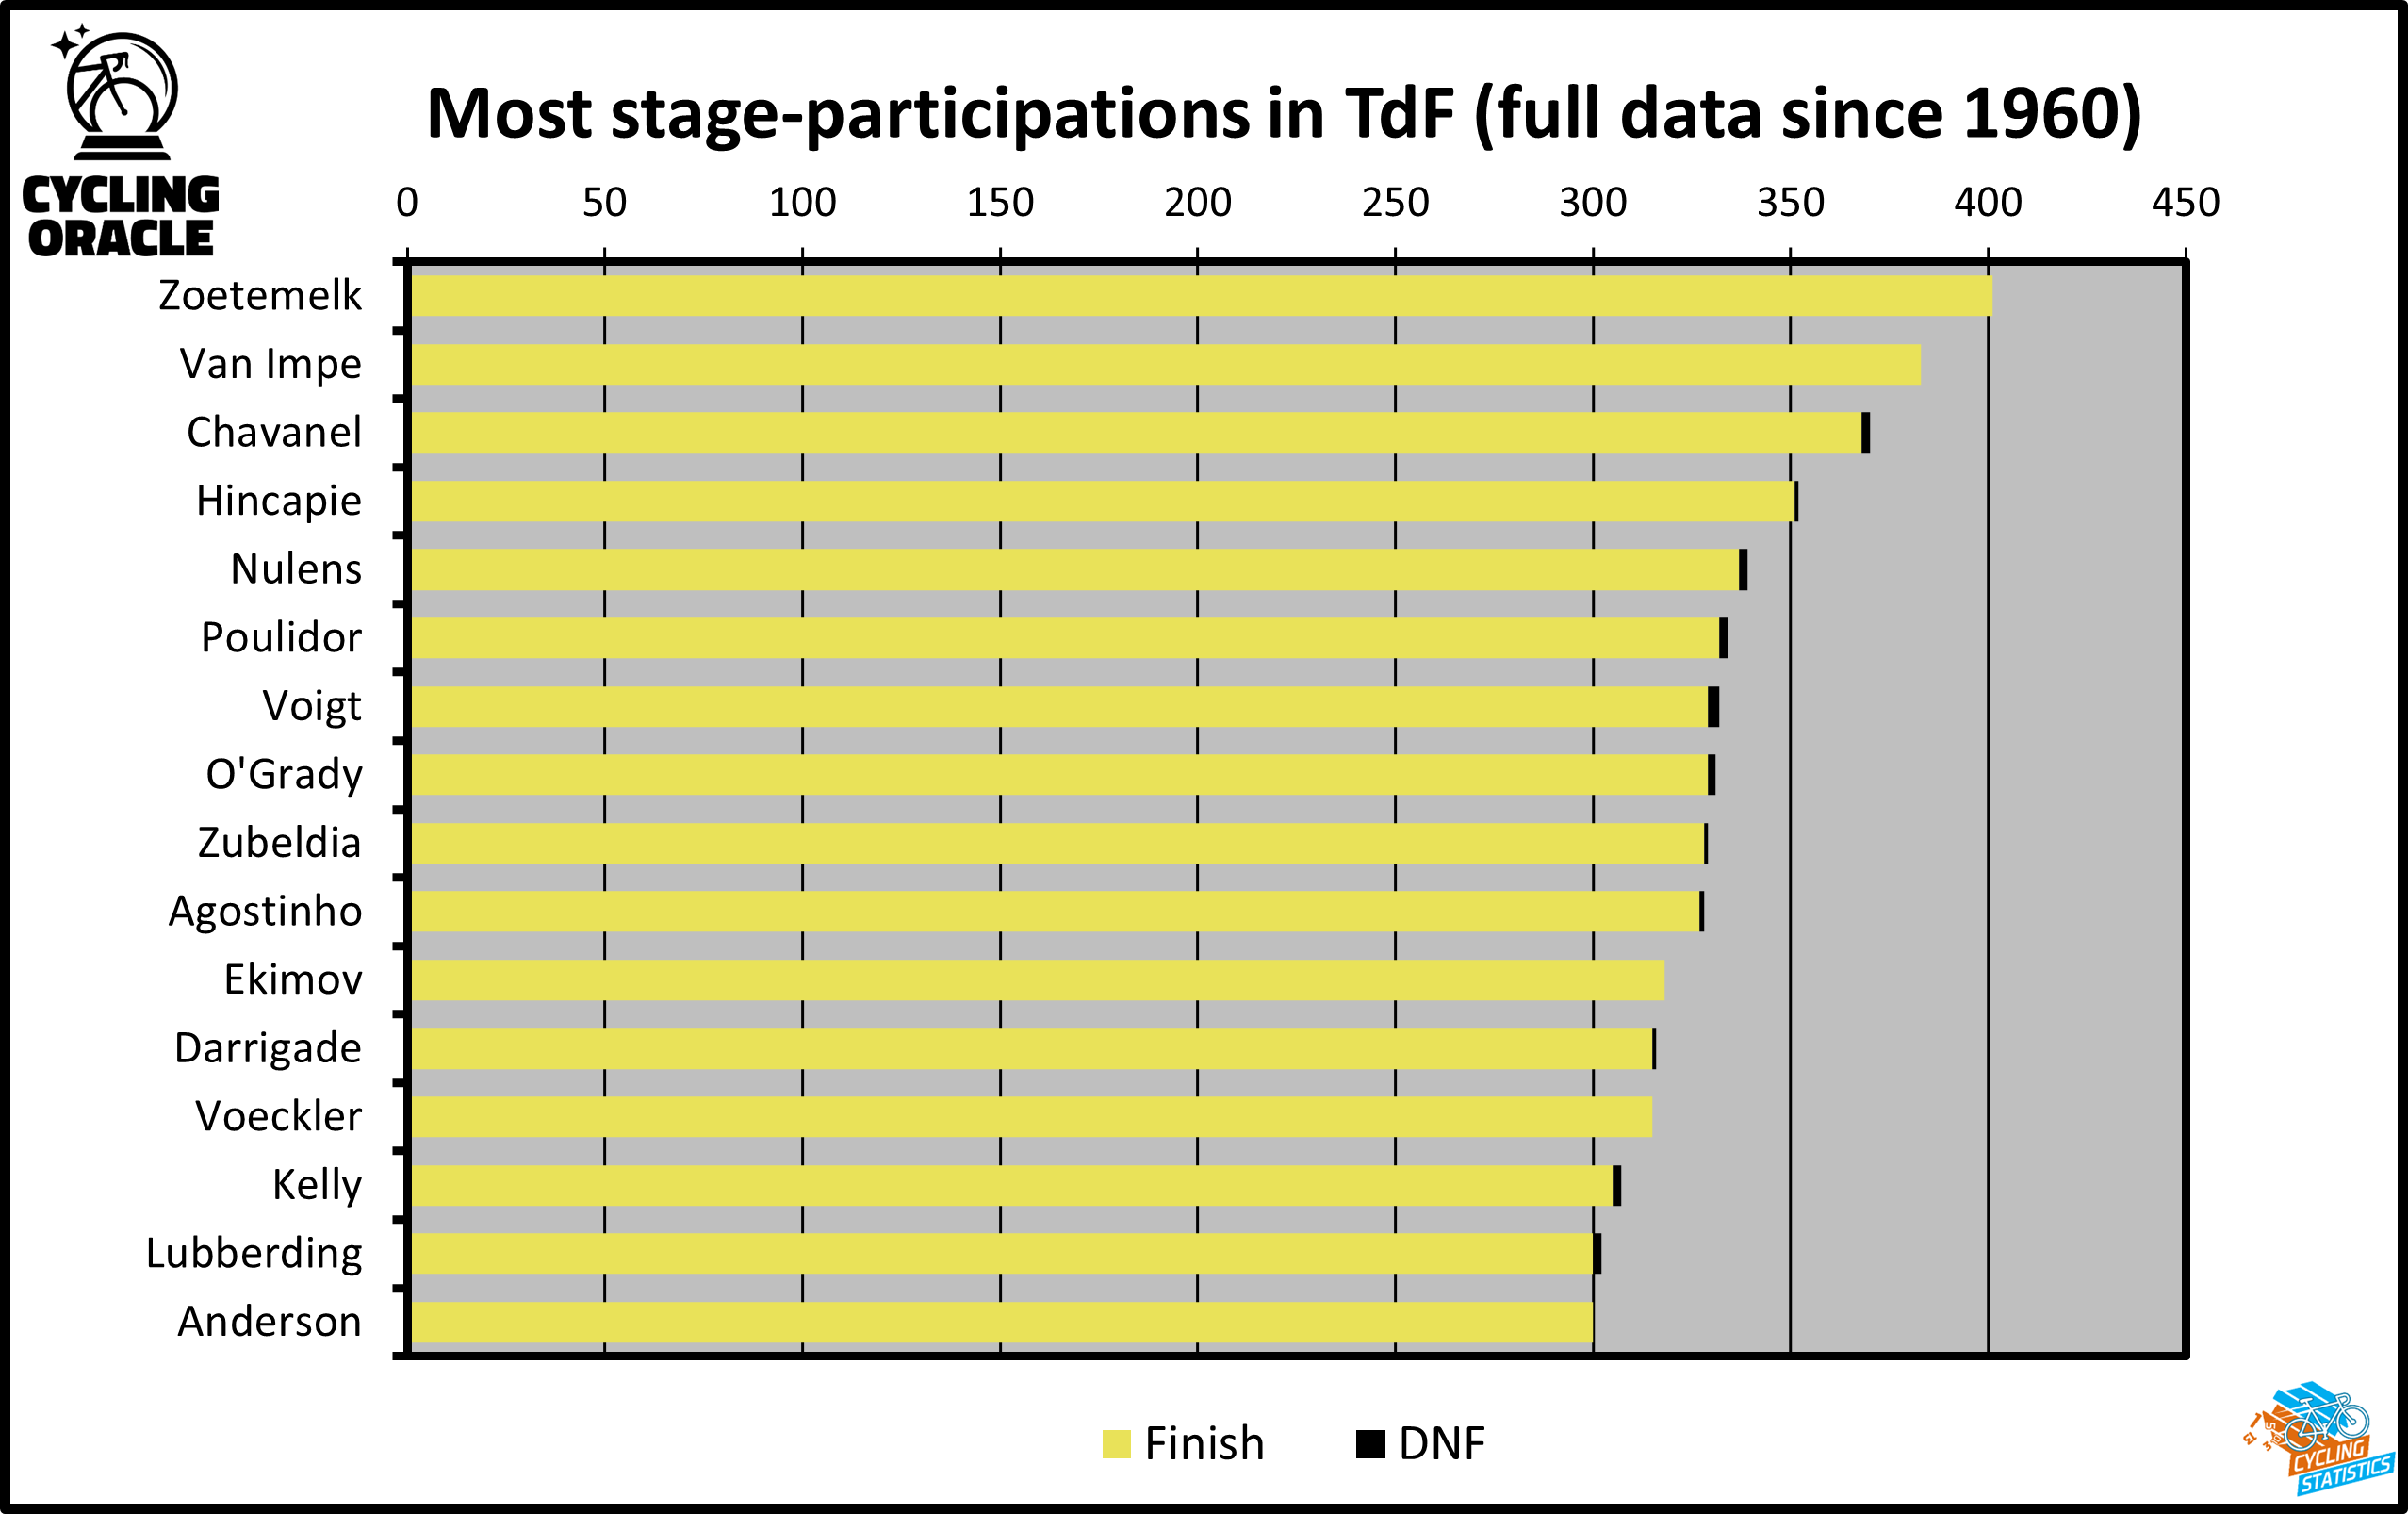 Most TDF-stages since 1960